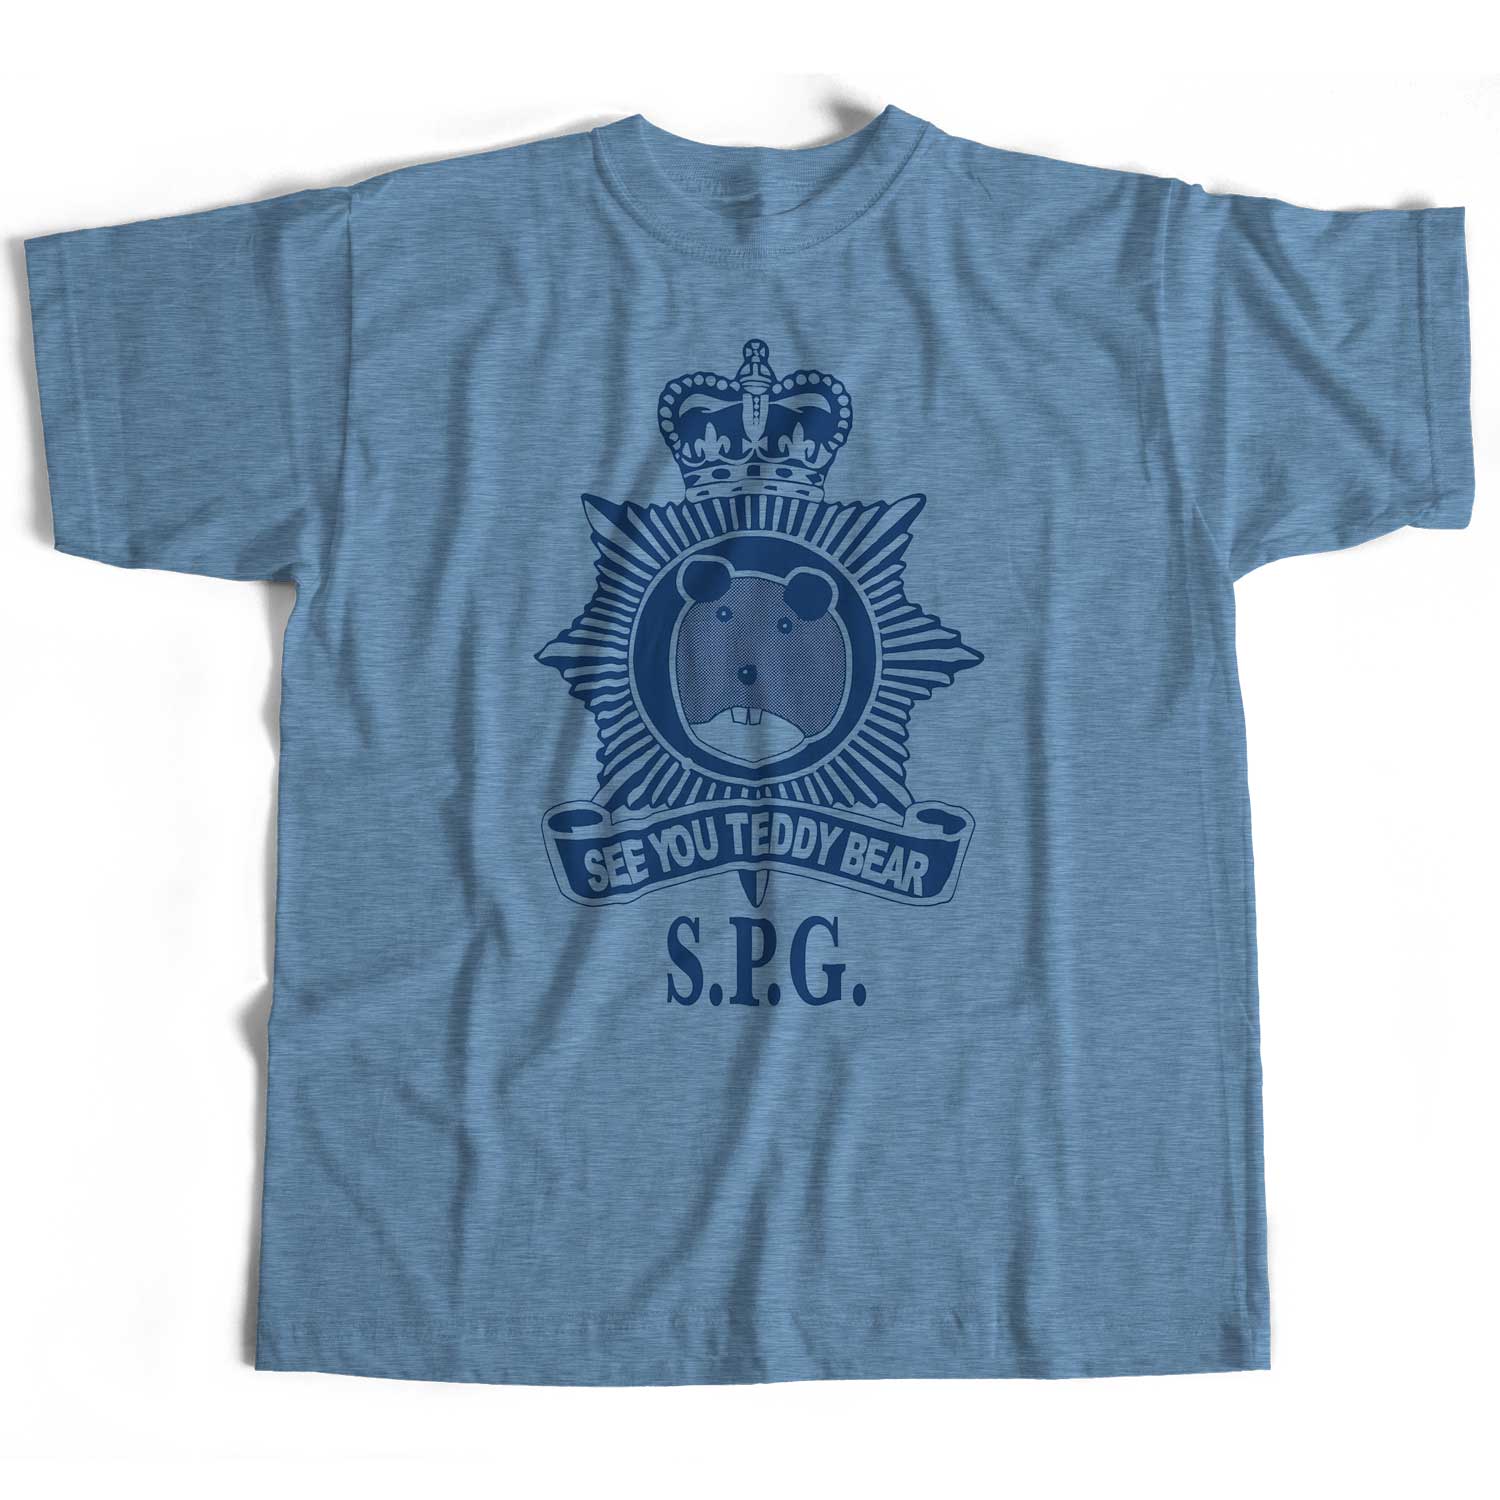 Inspired by The Young Ones T Shirt - S.P.G. Crest An Old Skool Hooligans TV Classic